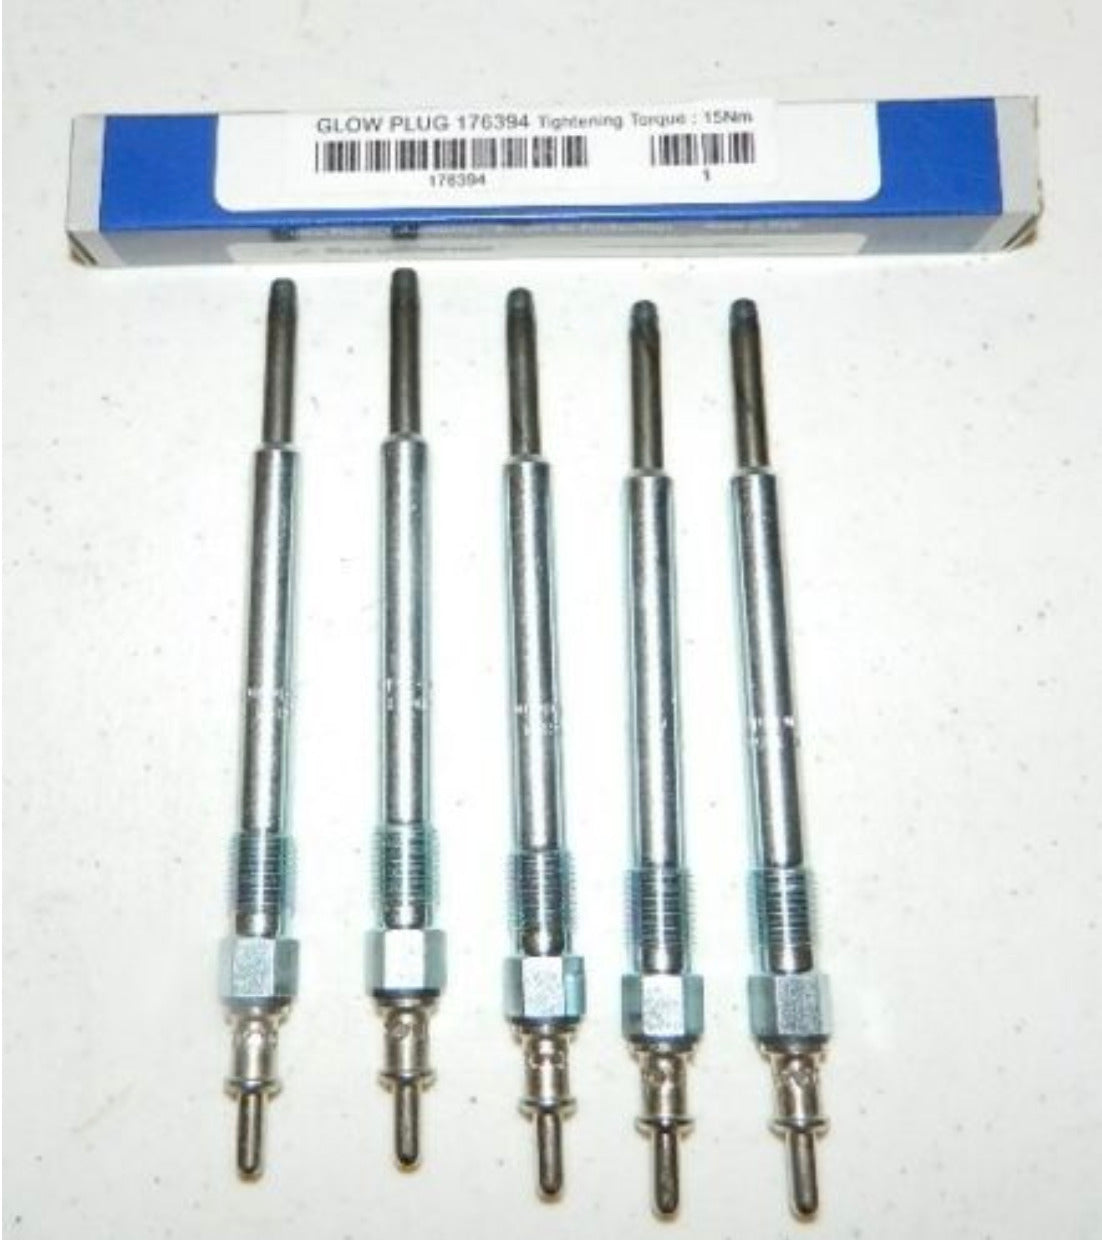 New set of 5 glow plugs for 2003-2006 Dodge/Freightliner Sprinter w/ 2.7L Diesel from Borg-Warner 176394